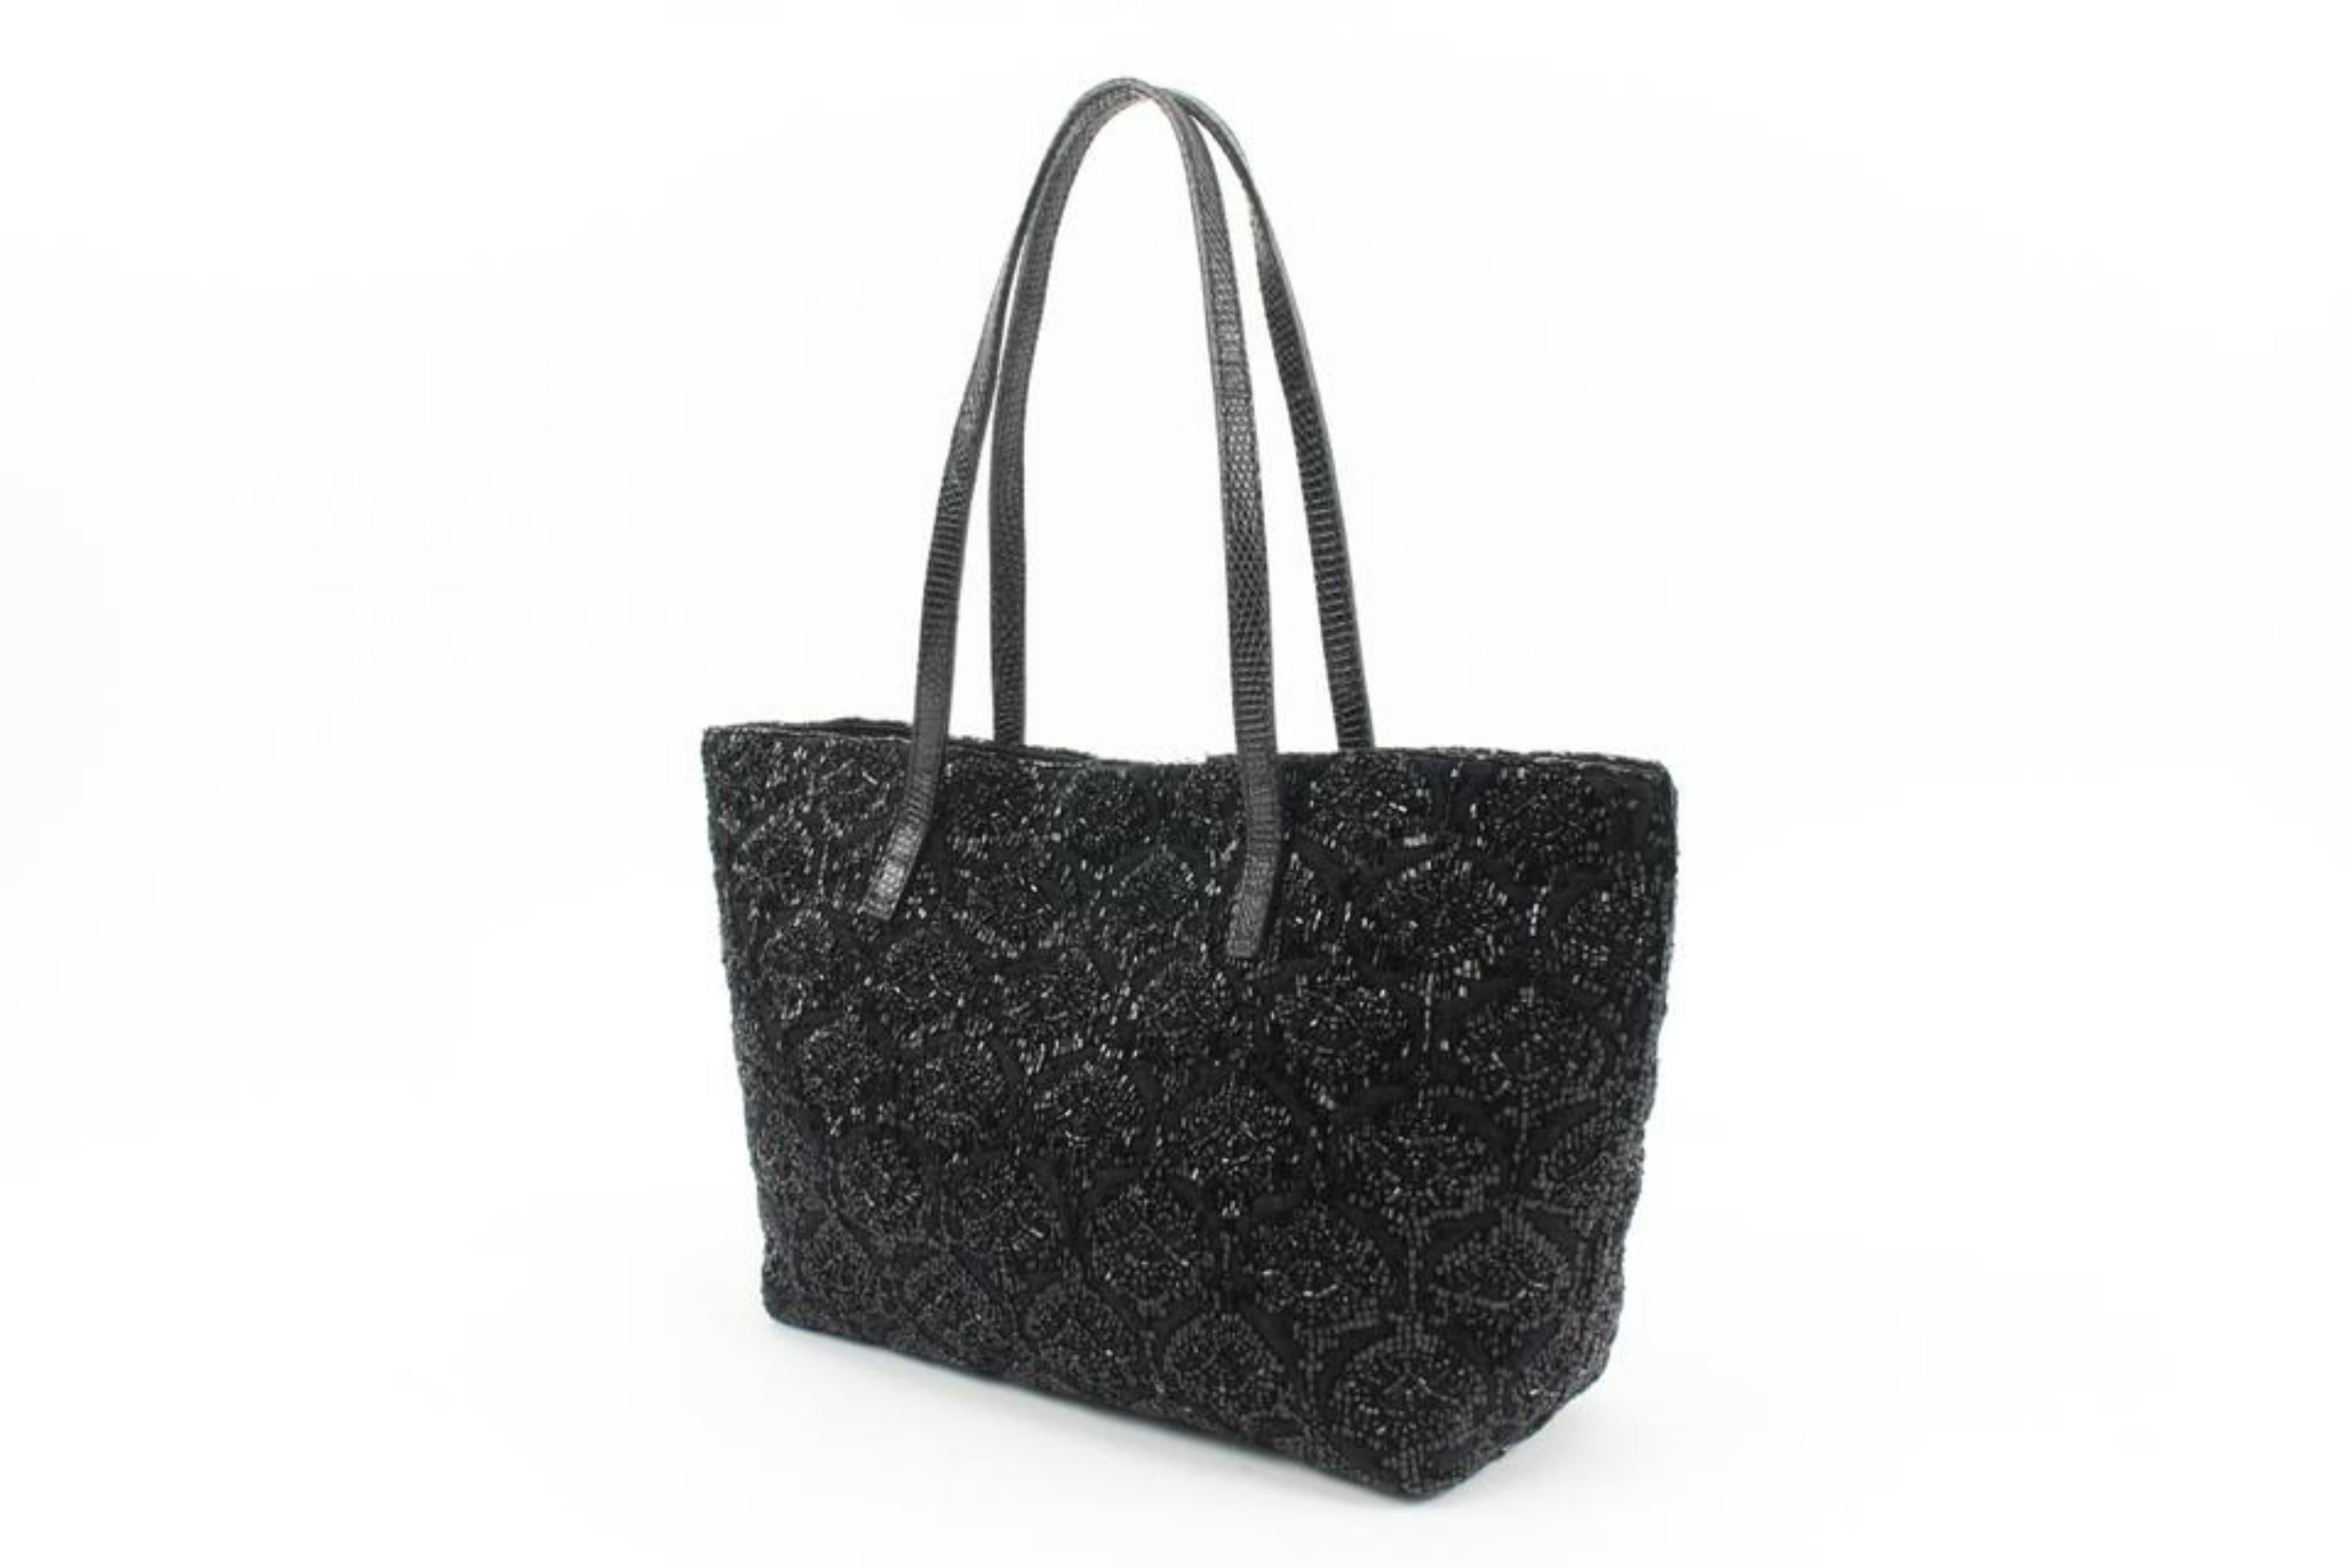 Fendi Black Sequin Beaded Roll Tote Shopper Bag S210F57
Date Code/Serial Number: 2354/8BH056/029
Made In: Italy
Measurements: Length:  12.5